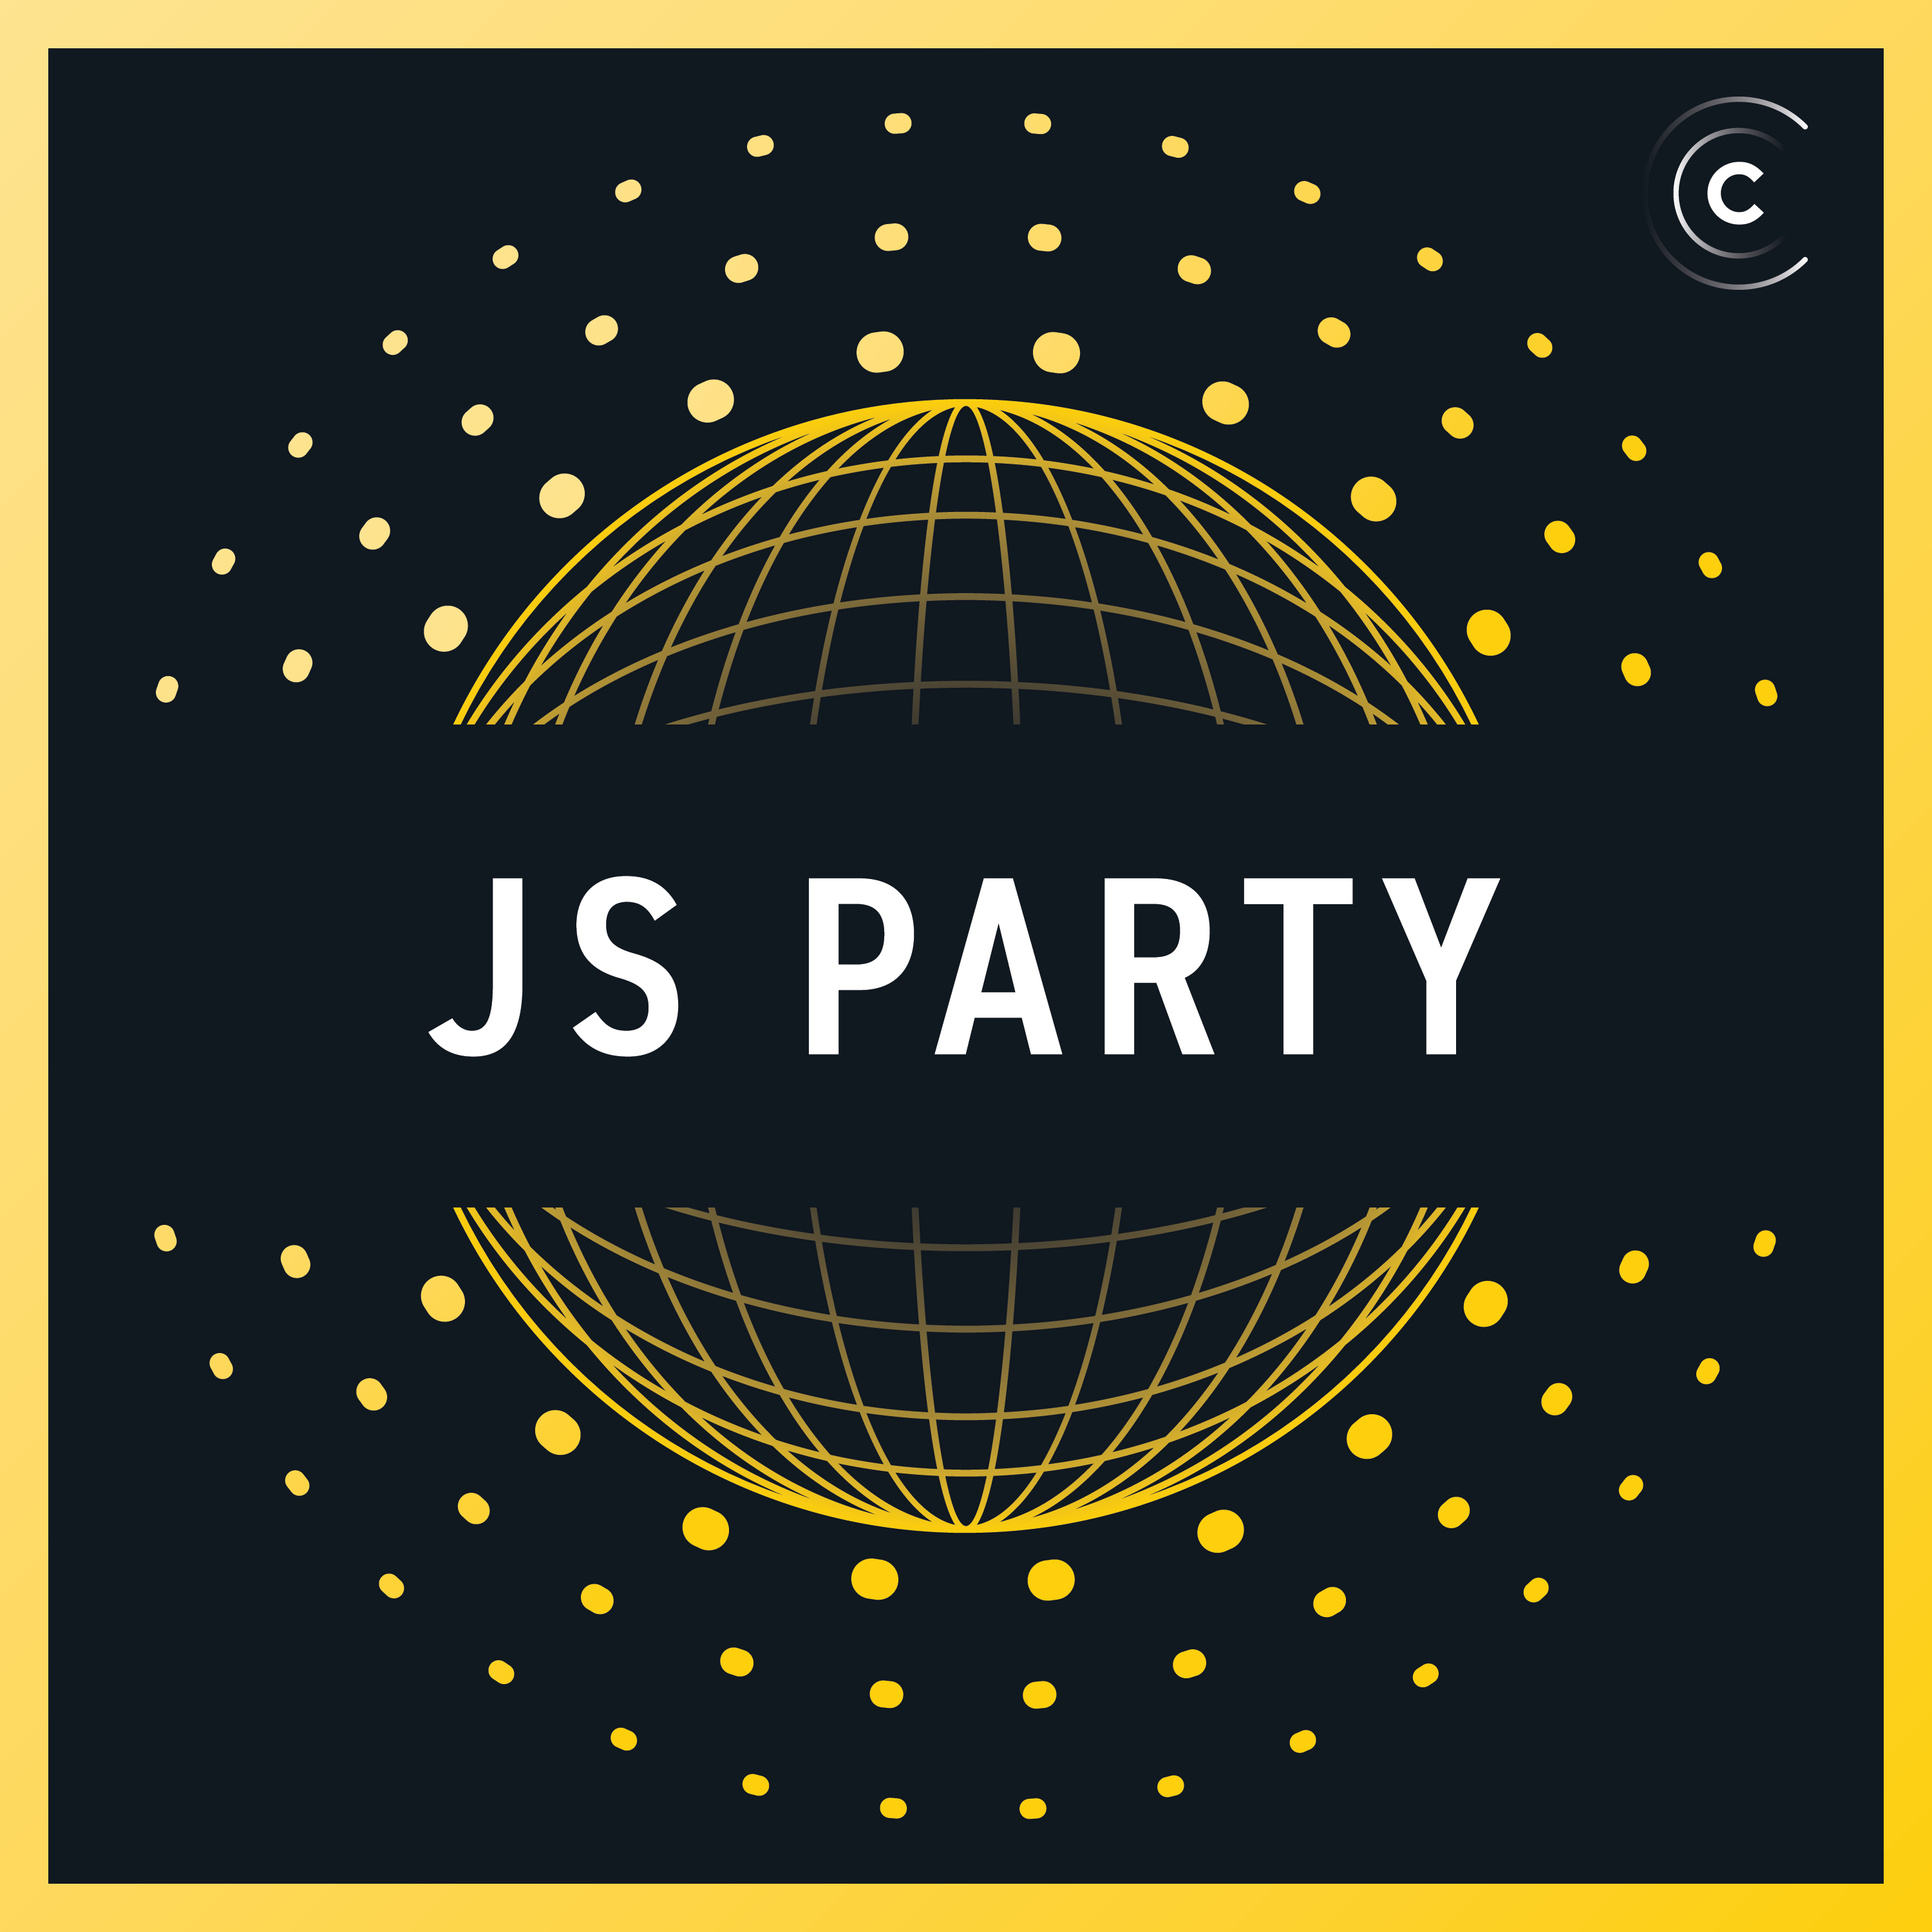 A logo for JS Party